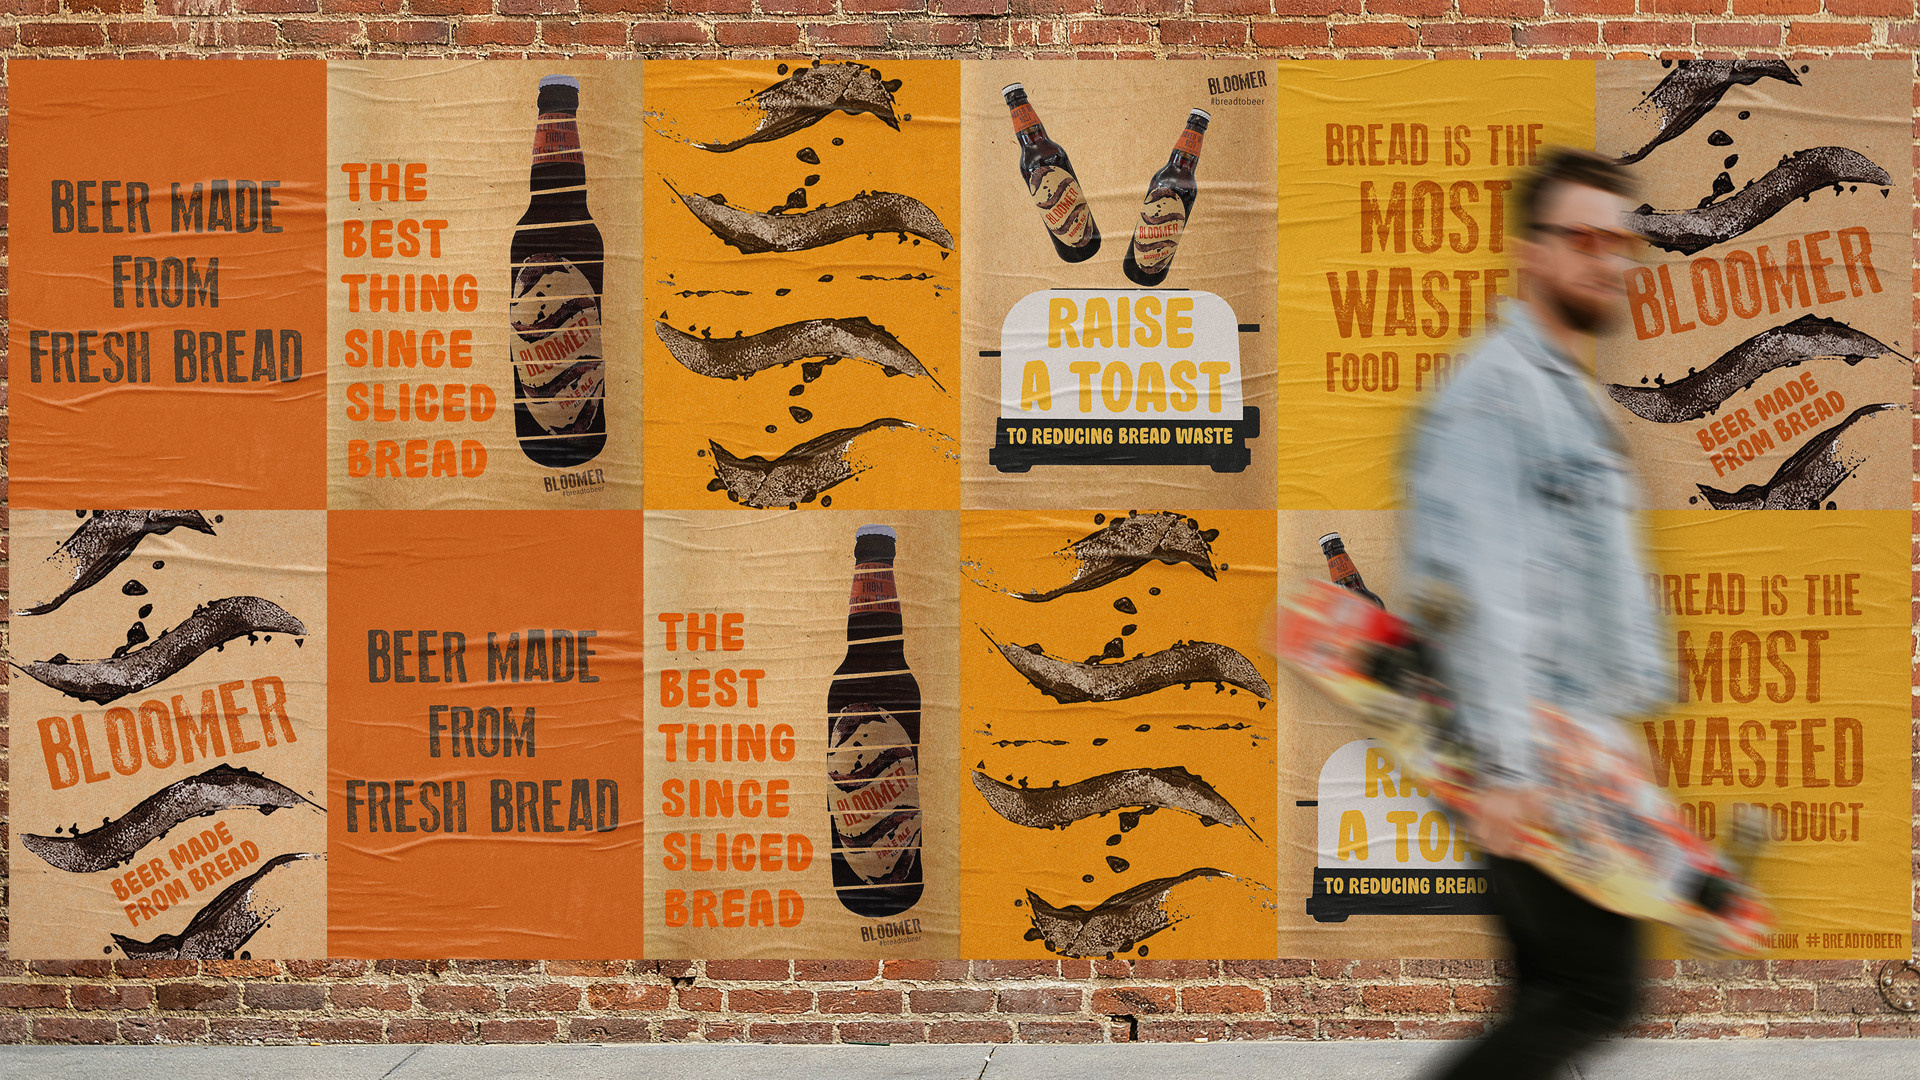 BA Graphic Design work by Megan Pearce showing an outdoor poster collection for Bloomer.